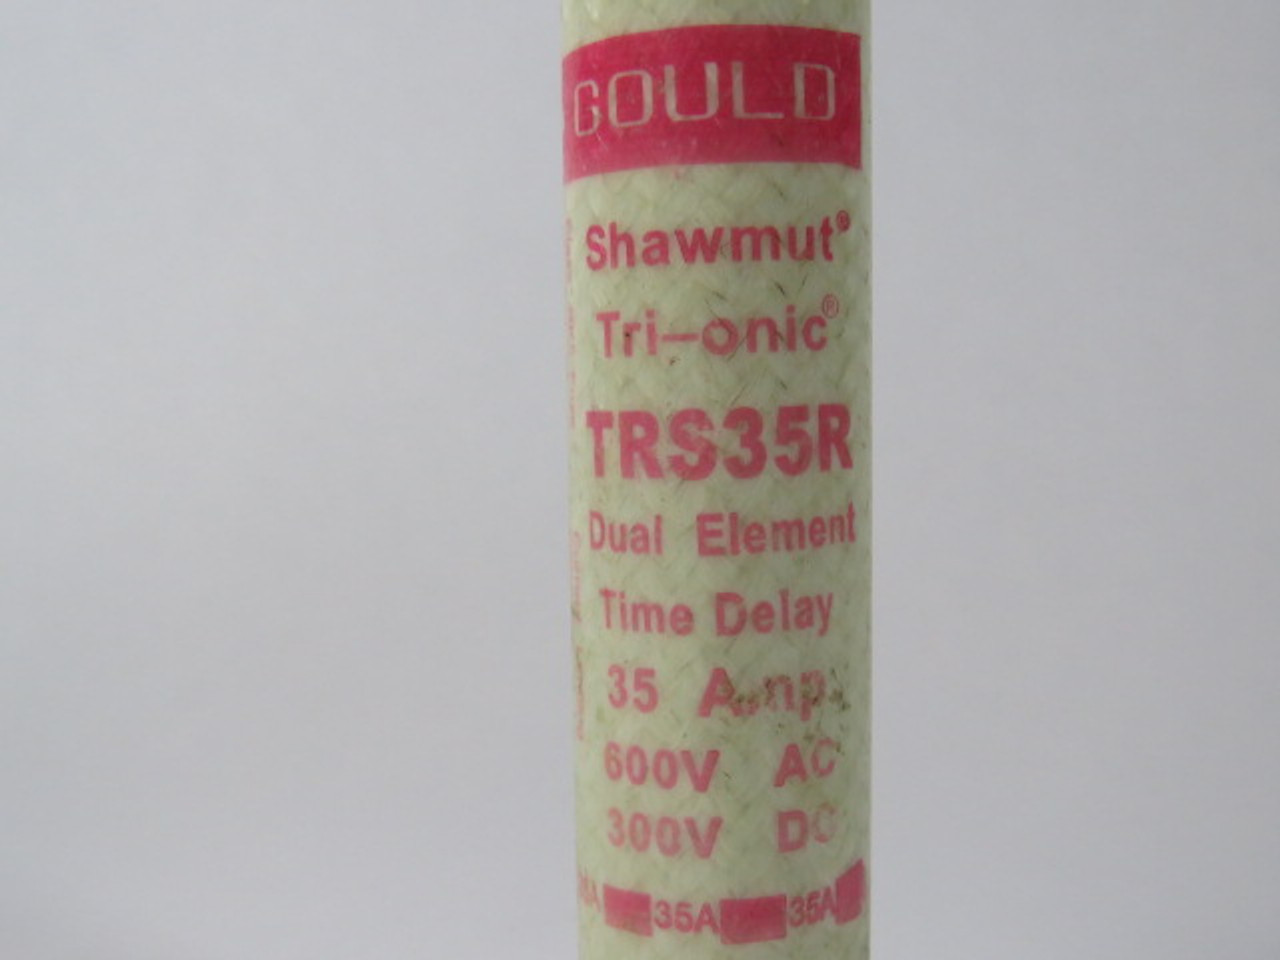 Gould Shawmut TRS35R Time Delay Fuse 35A 600V USED